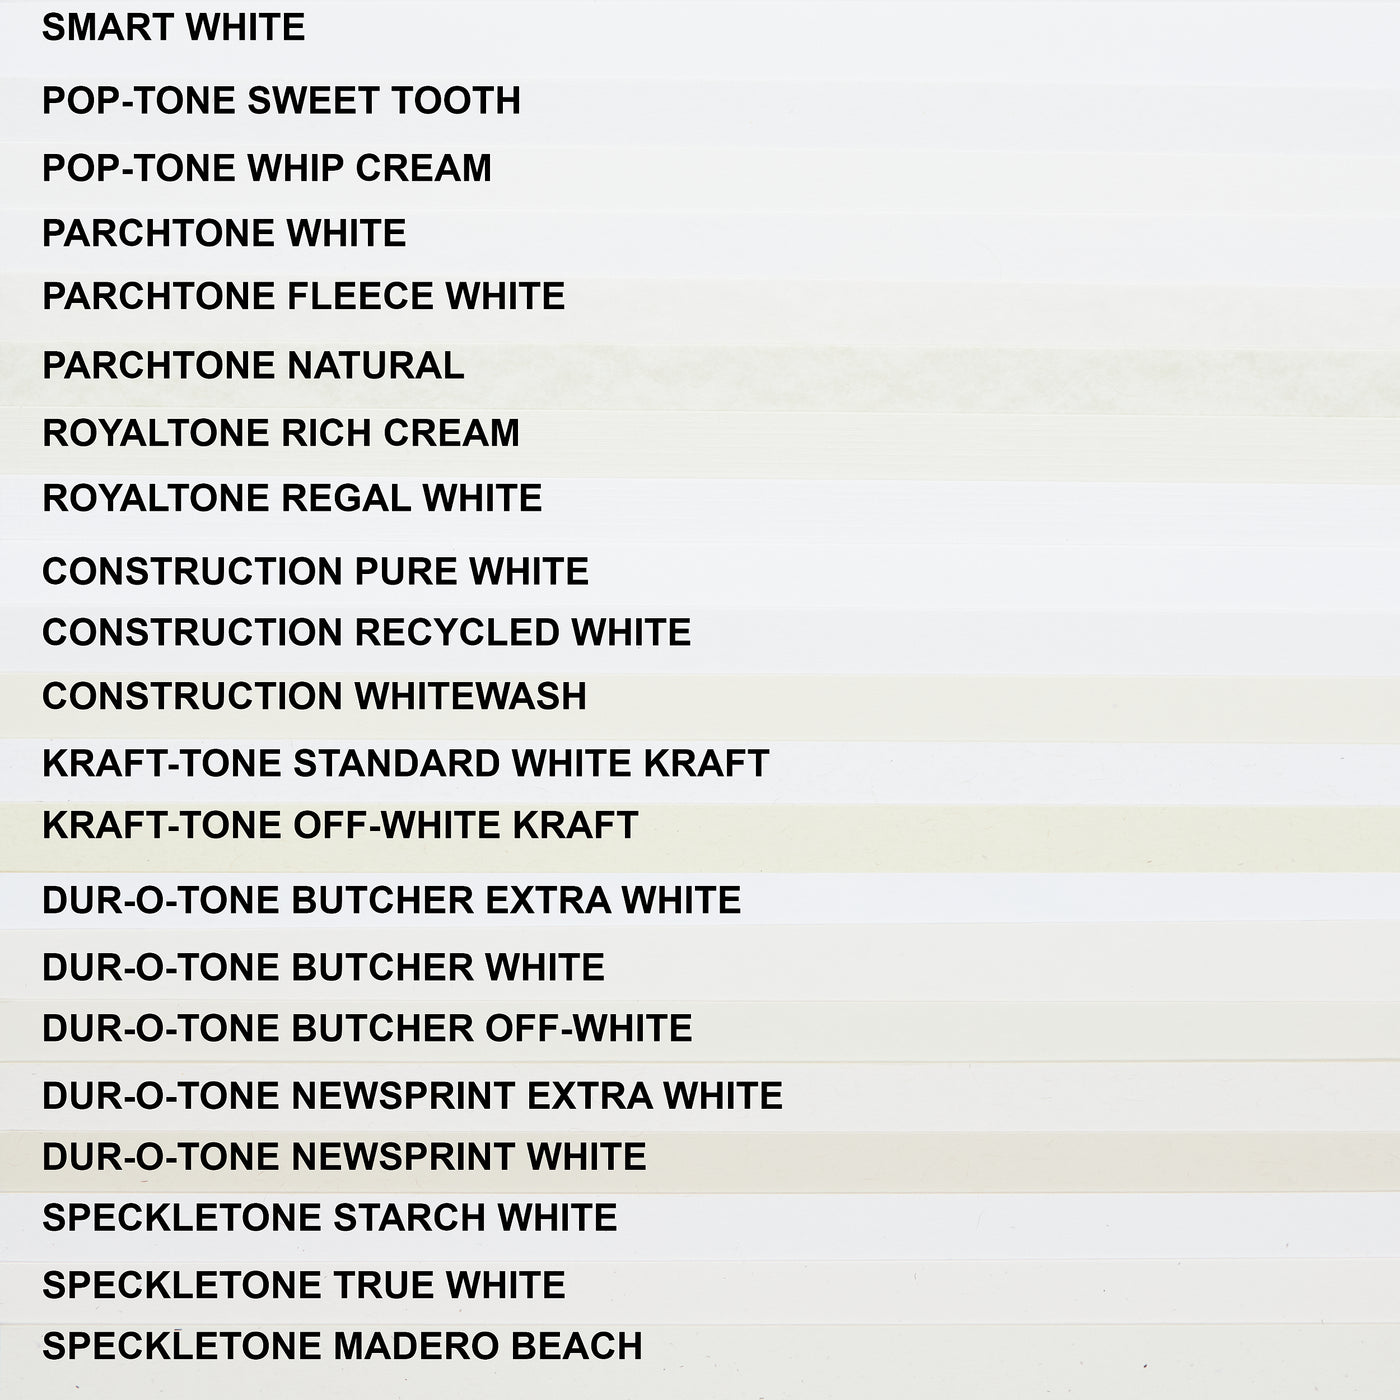 Butcher Extra White Paper (Dur-O-Tone, Text Weight)